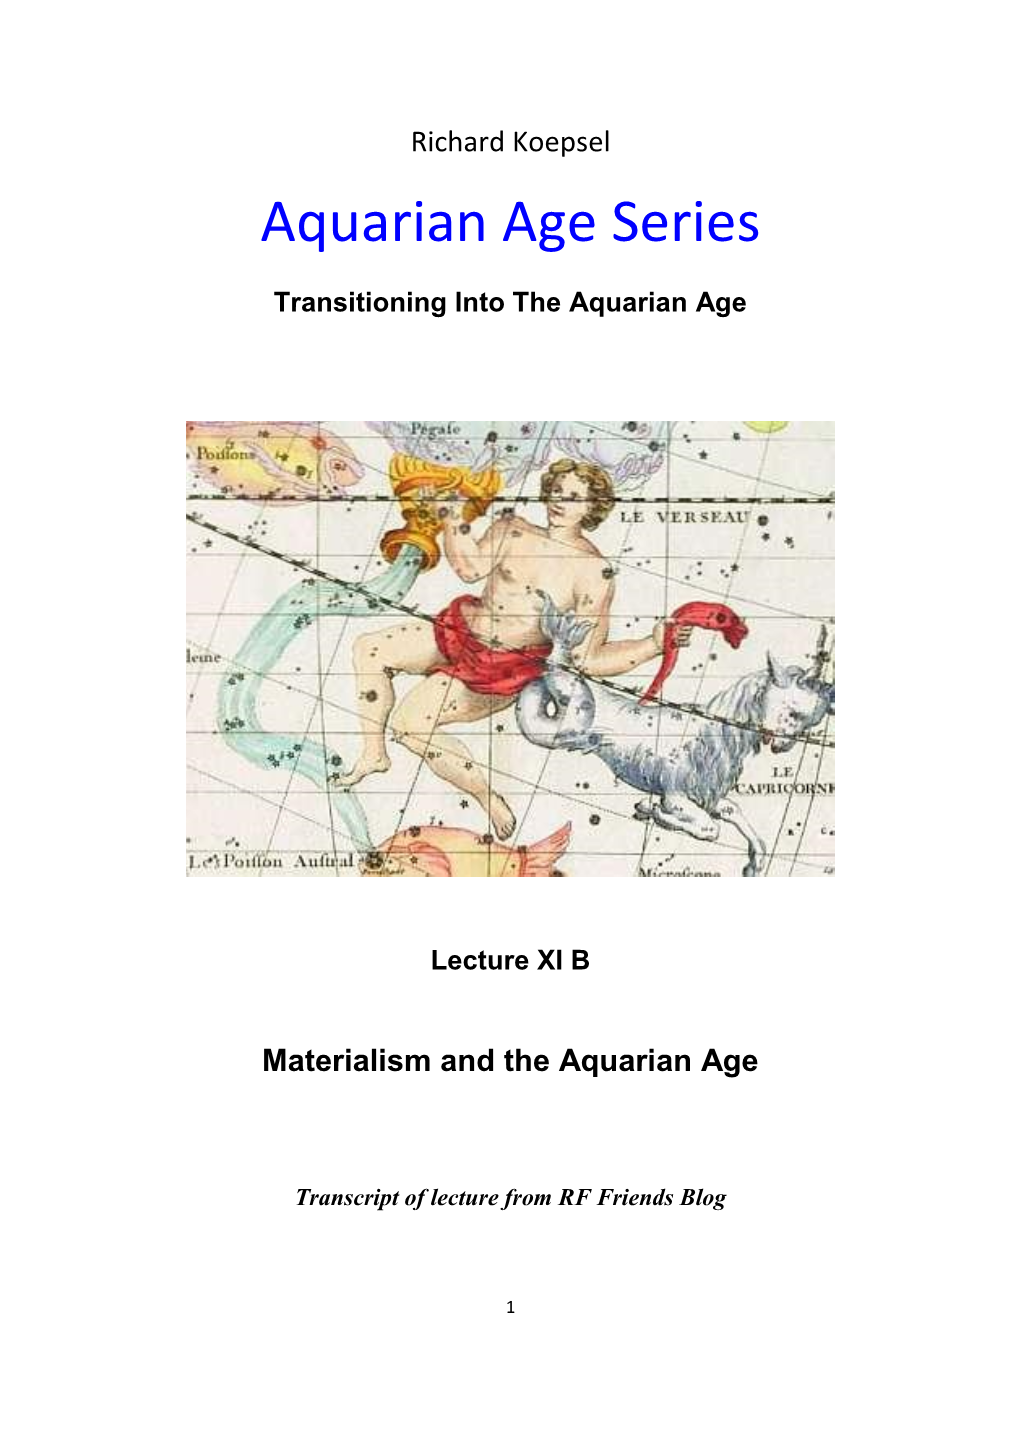 Materialism and the Aquarian Age